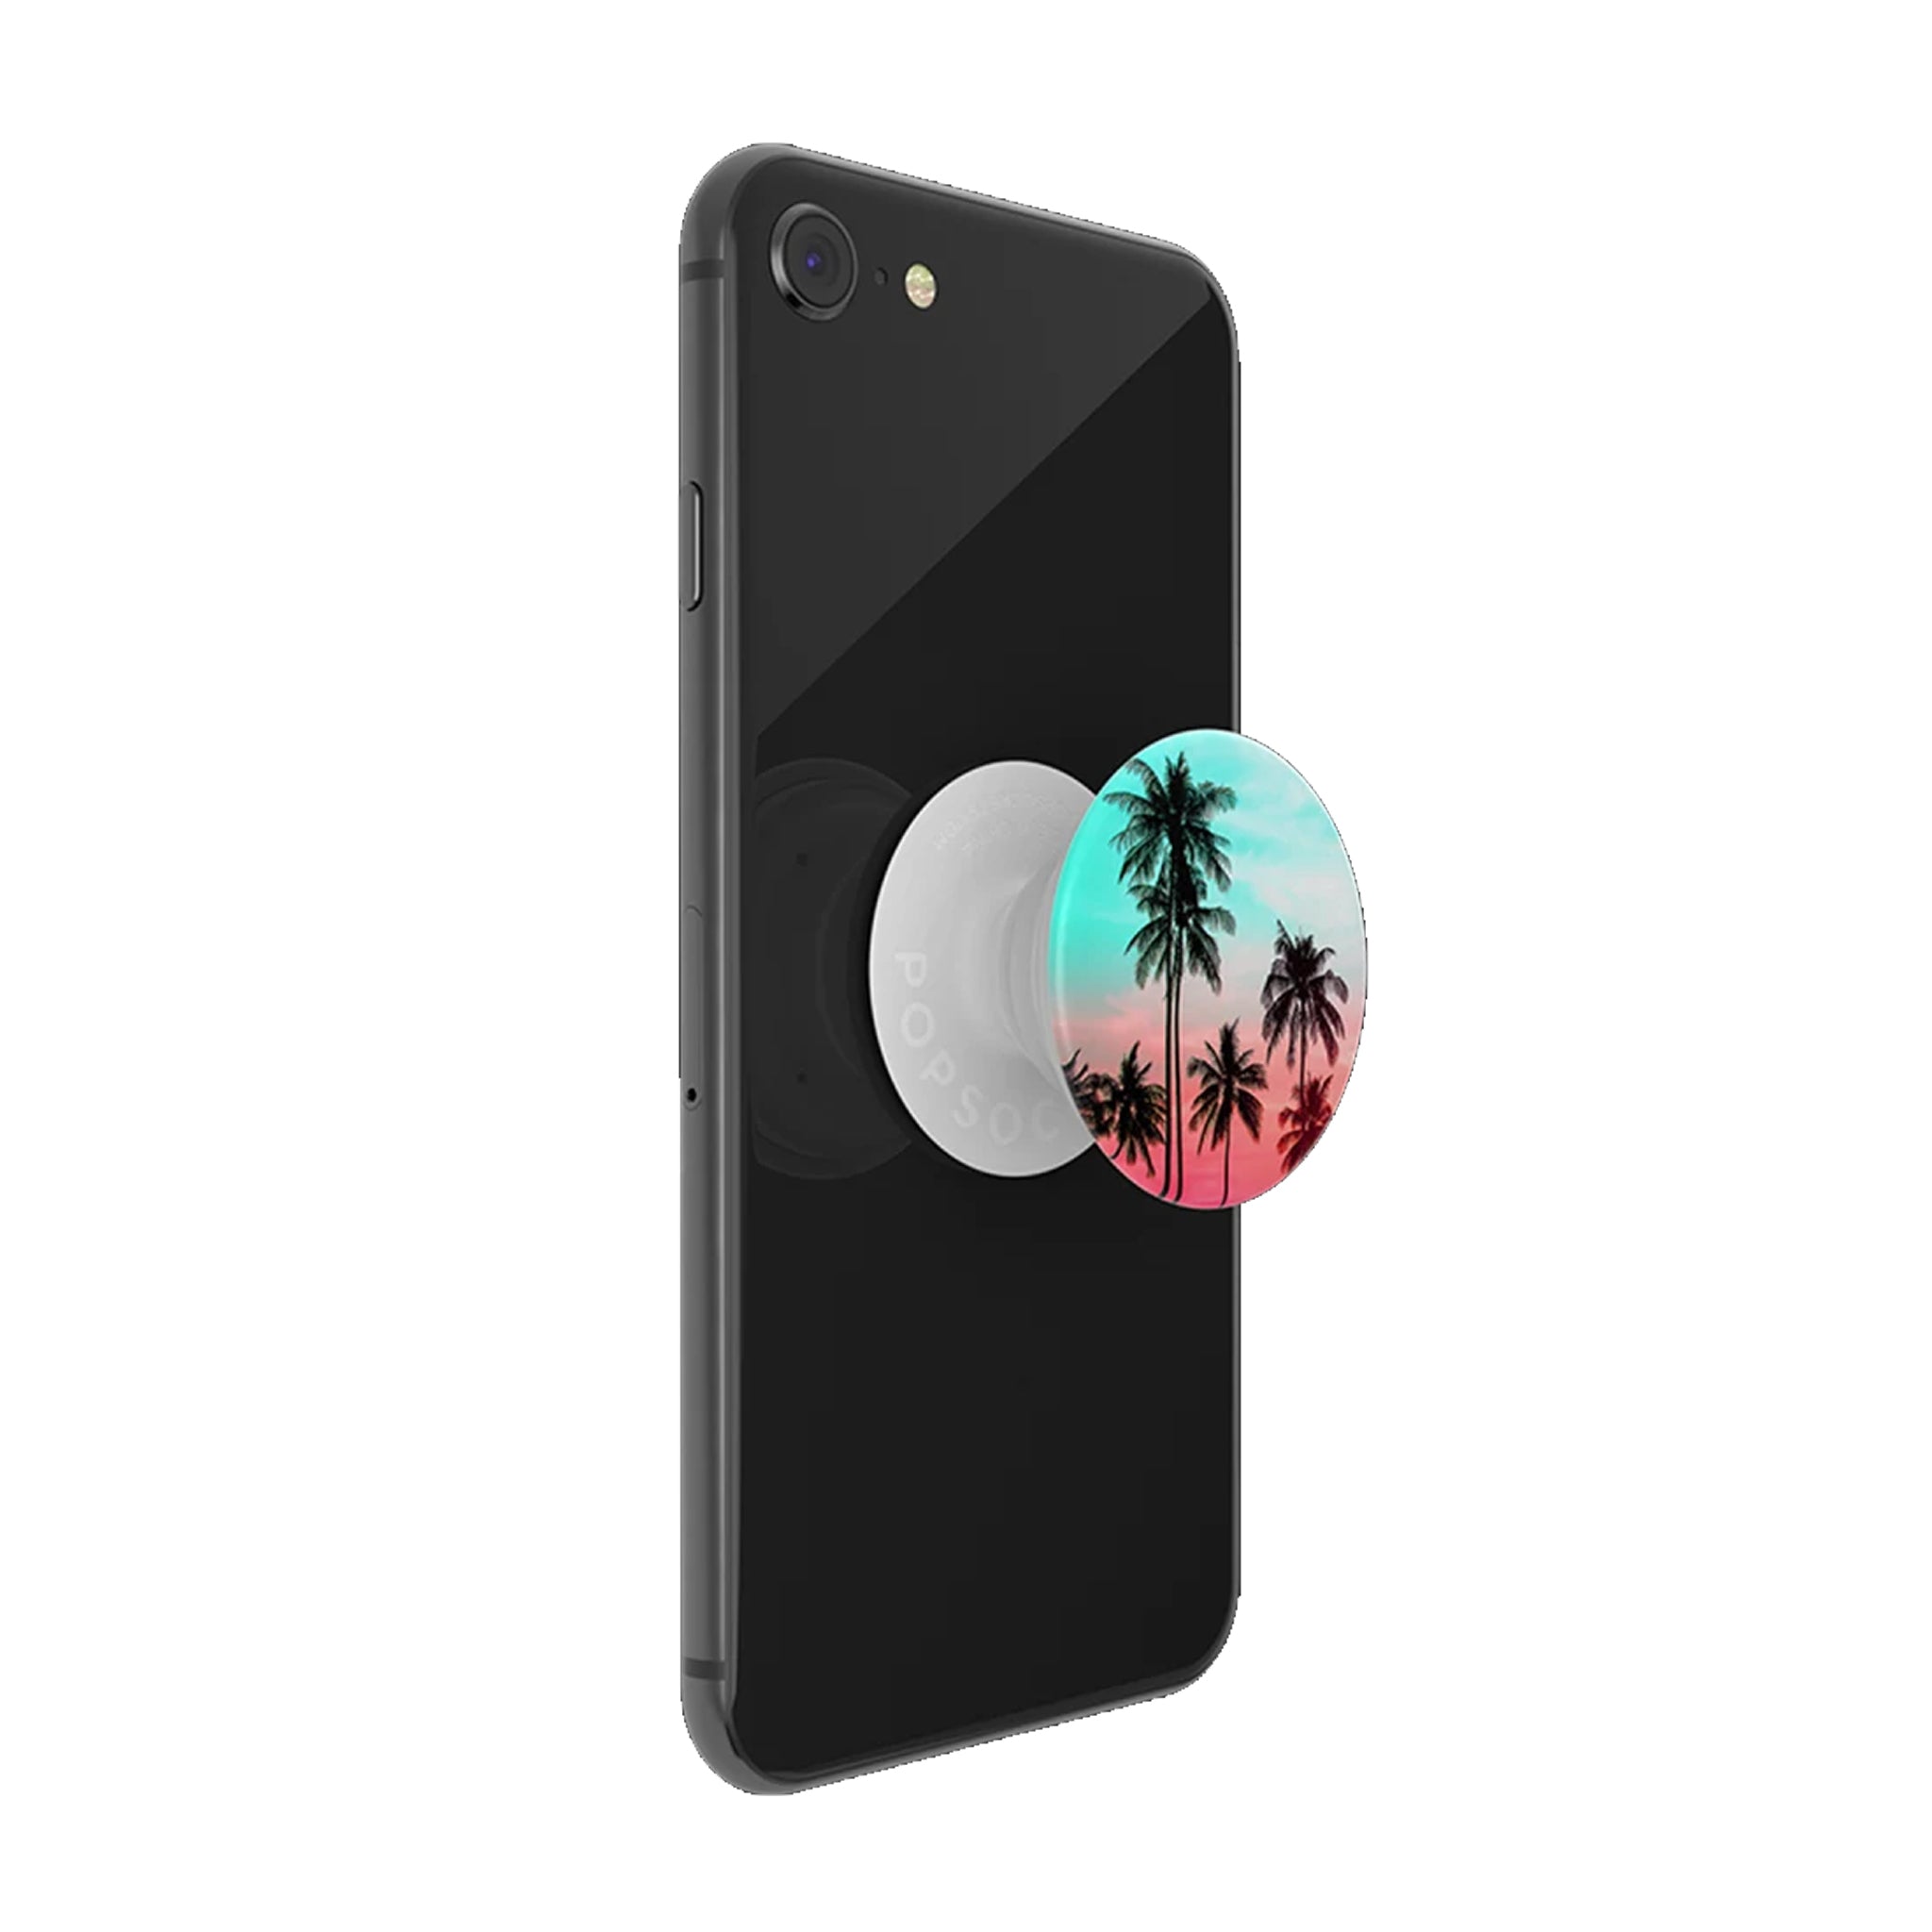 Popsockets - Popgrip - Tropical Sunset